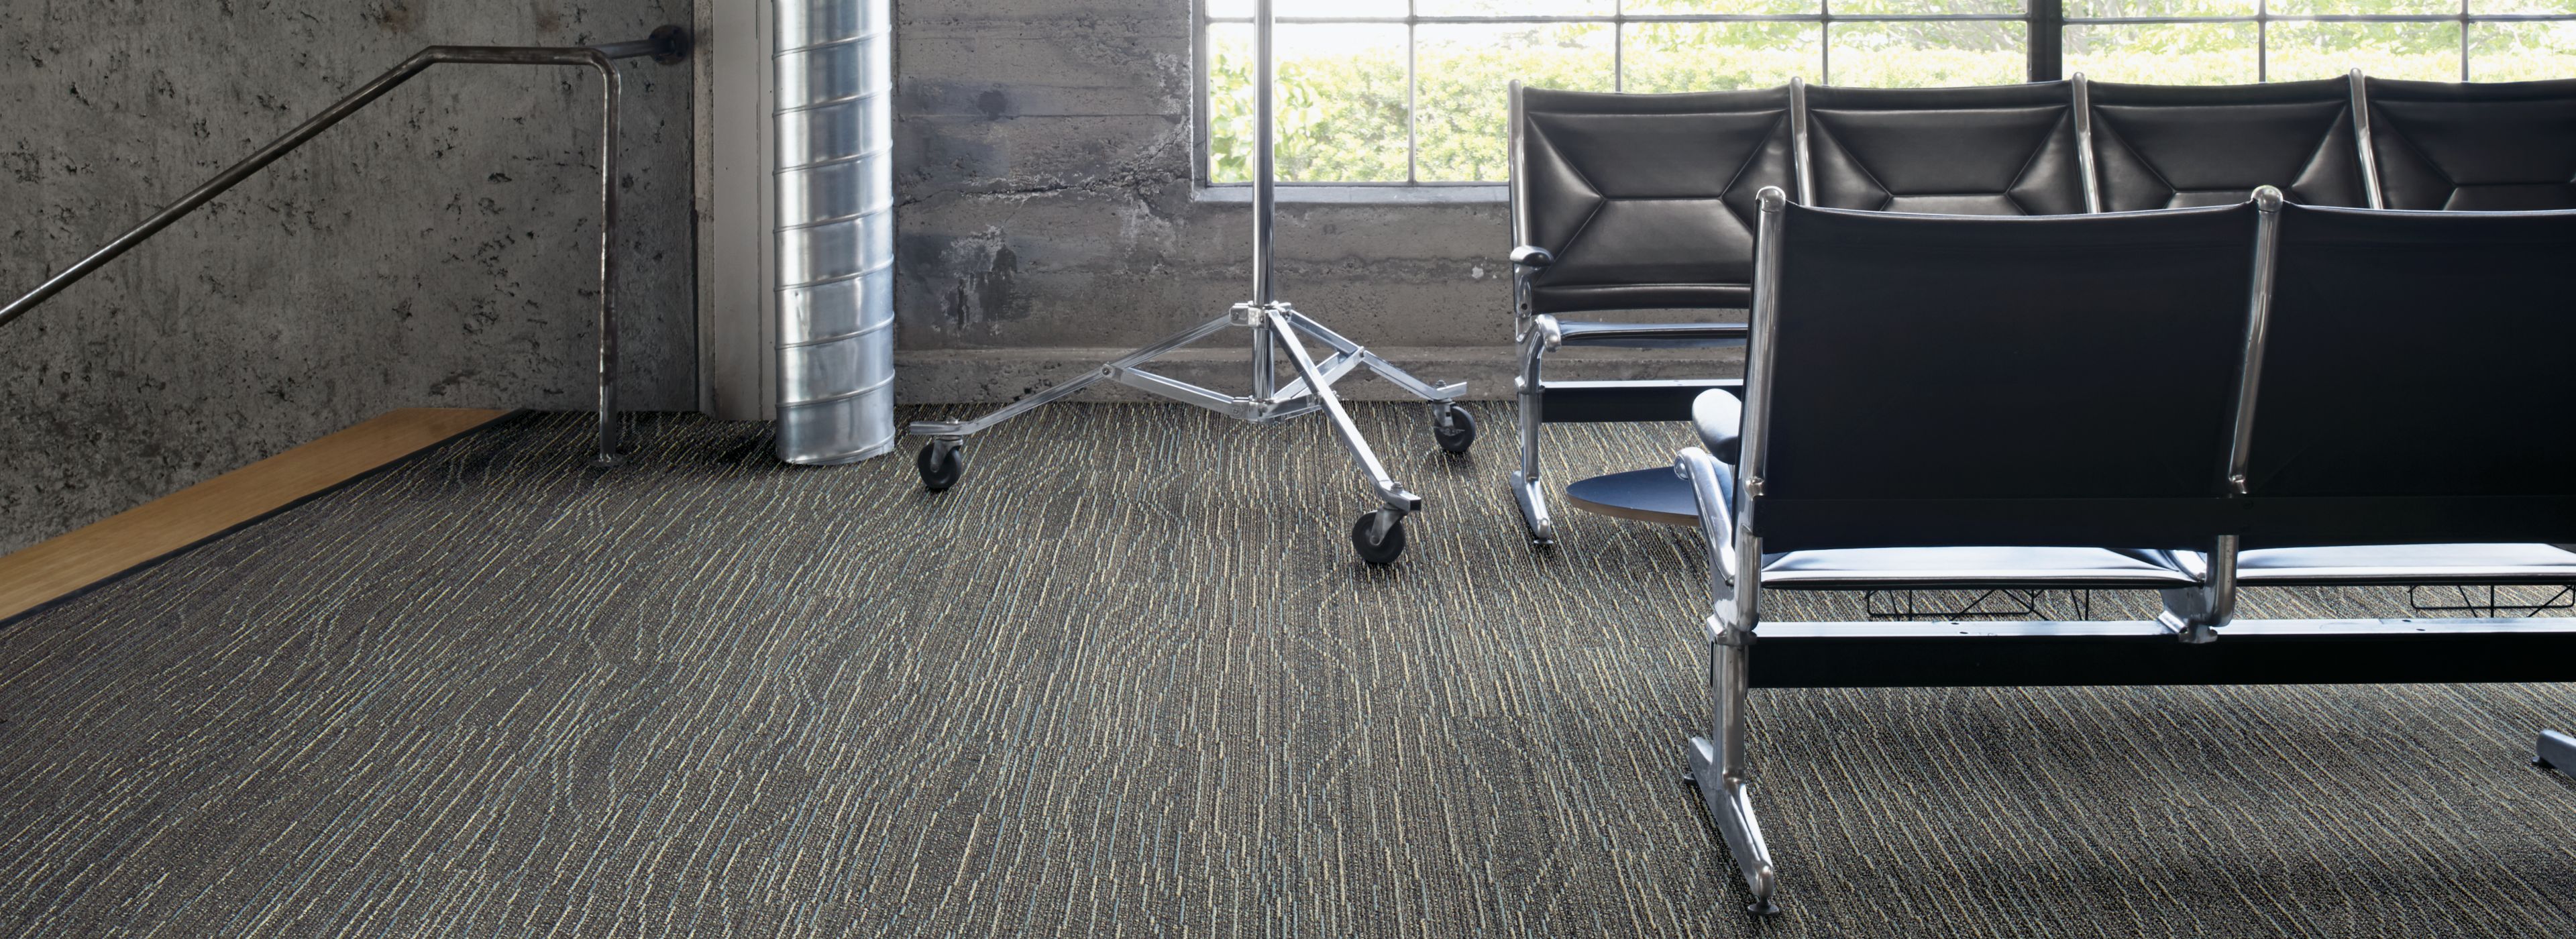 Interface Snow Moon plank carpet tile in waiting area with concrete walls and exposed beams numéro d’image 1